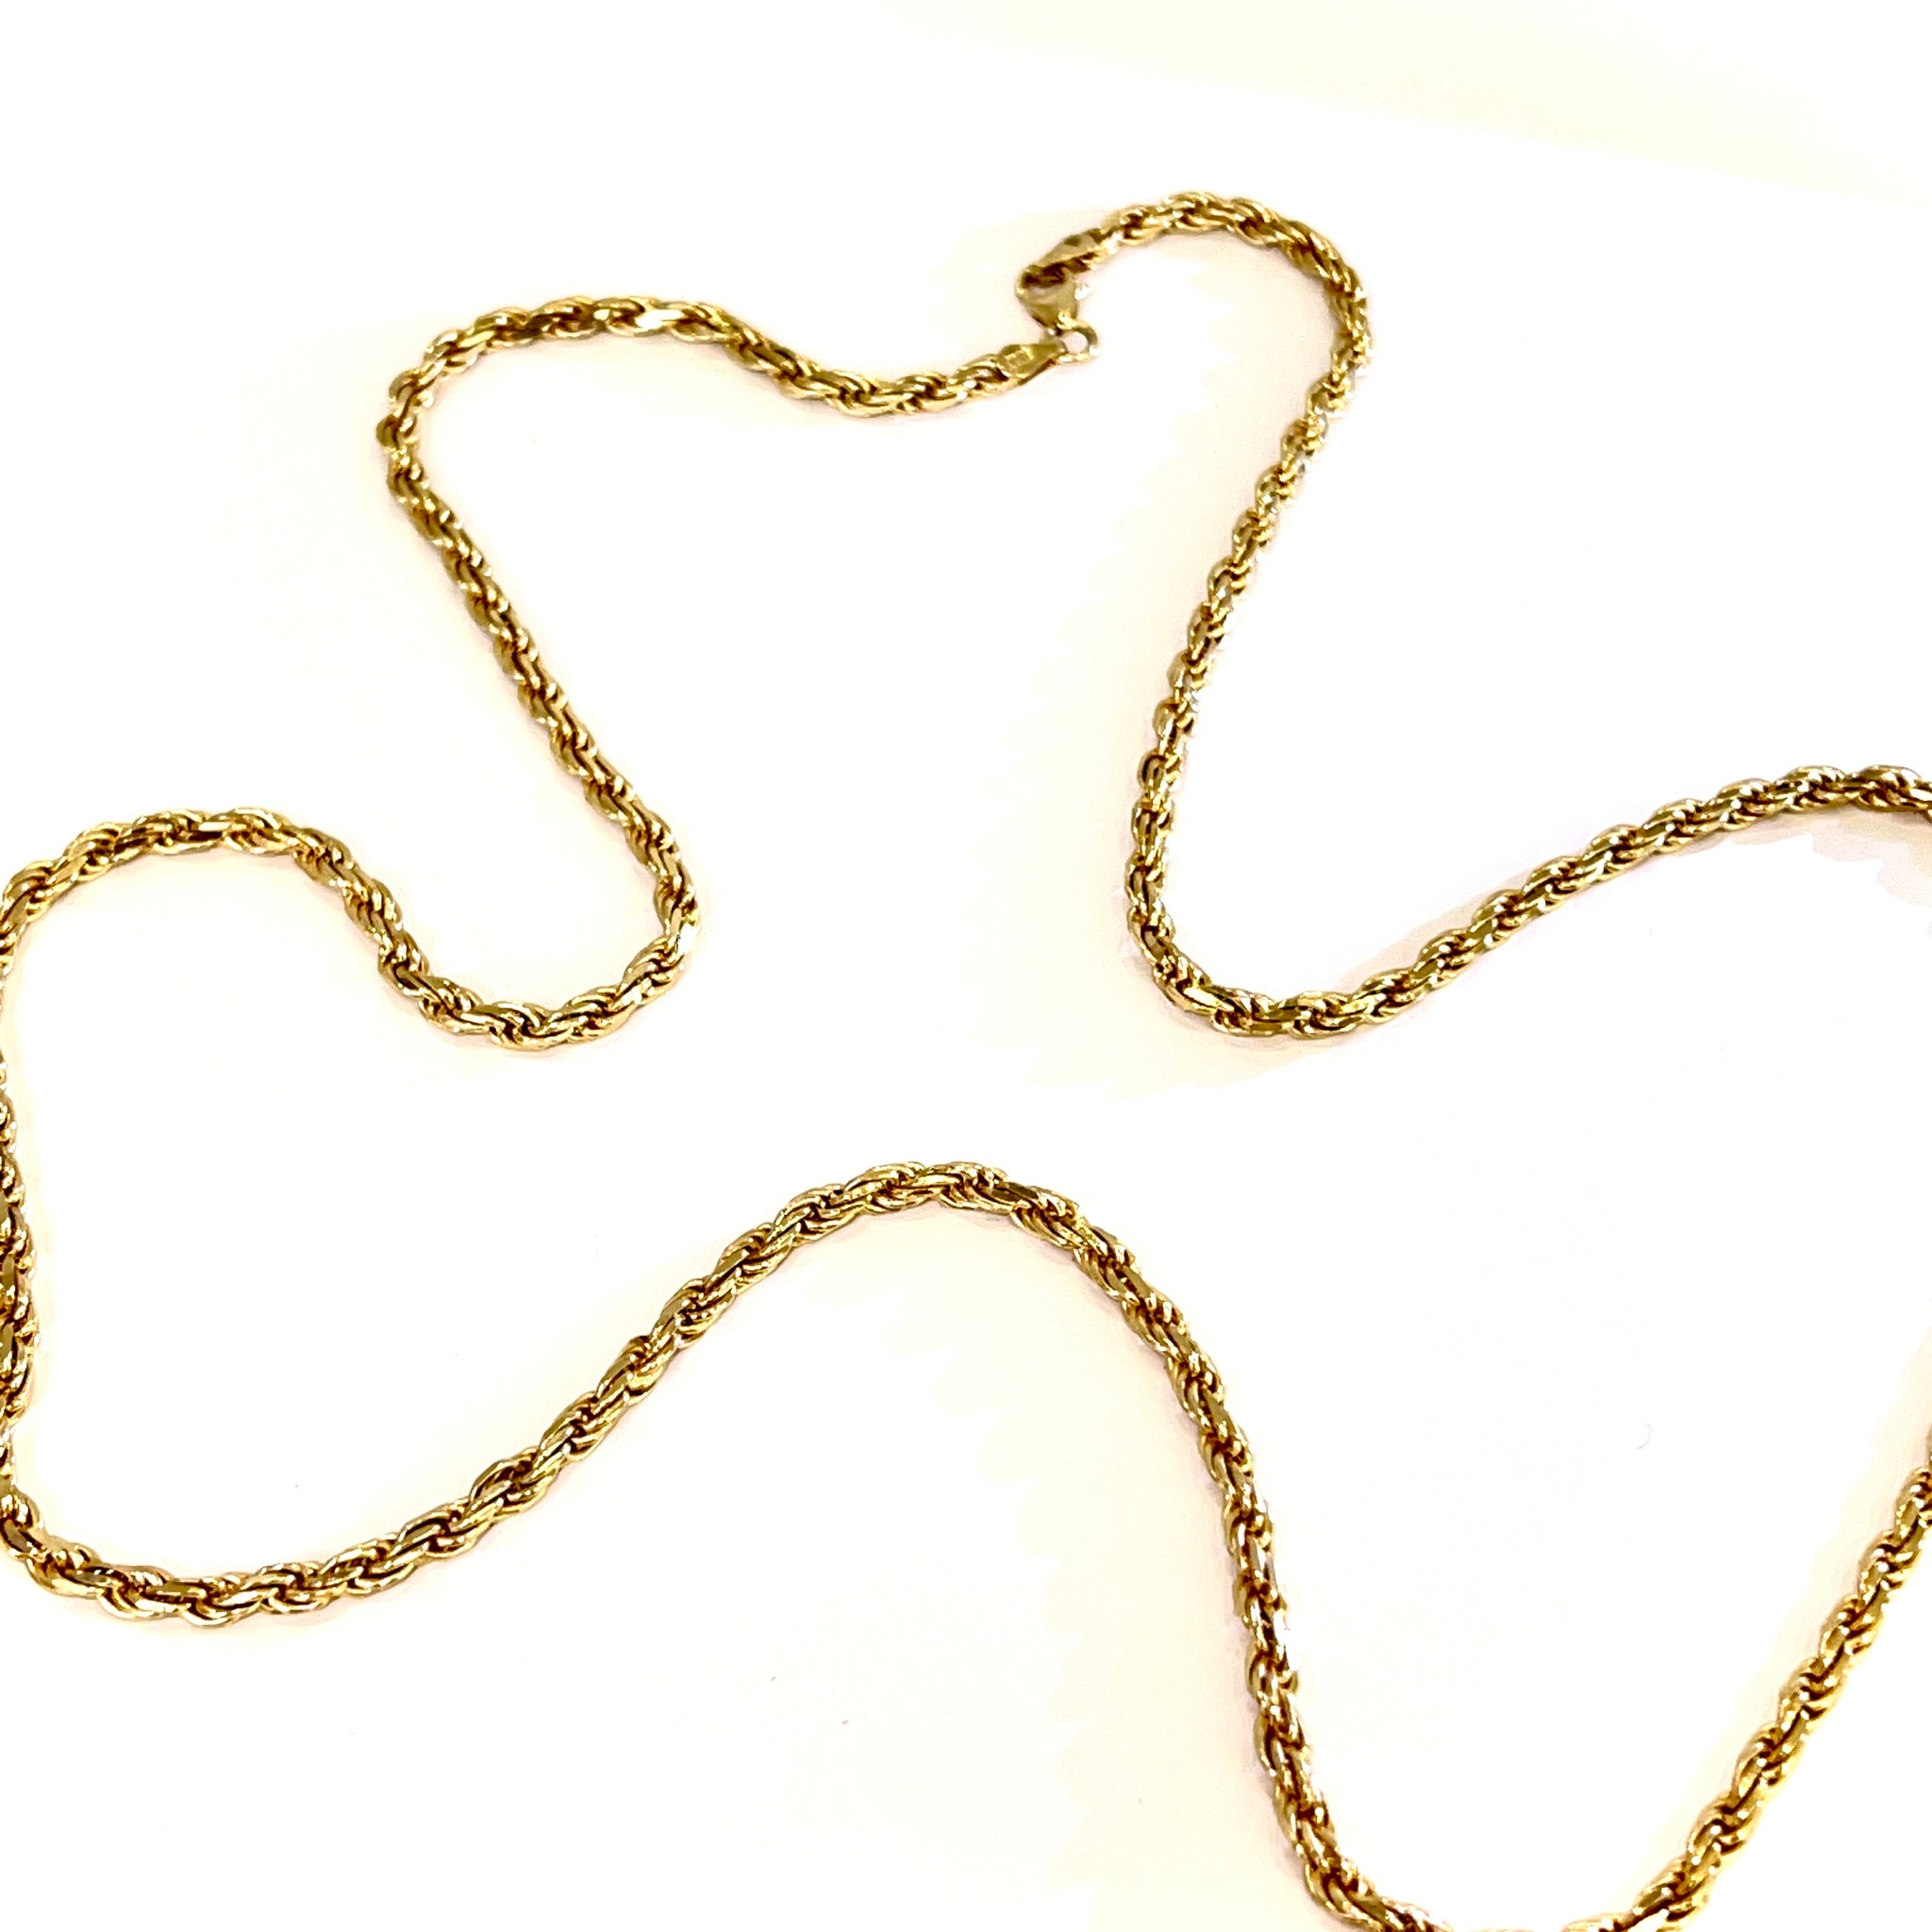 Solid Rope Chain - 14 carat gold - 65cm / 3.5mm